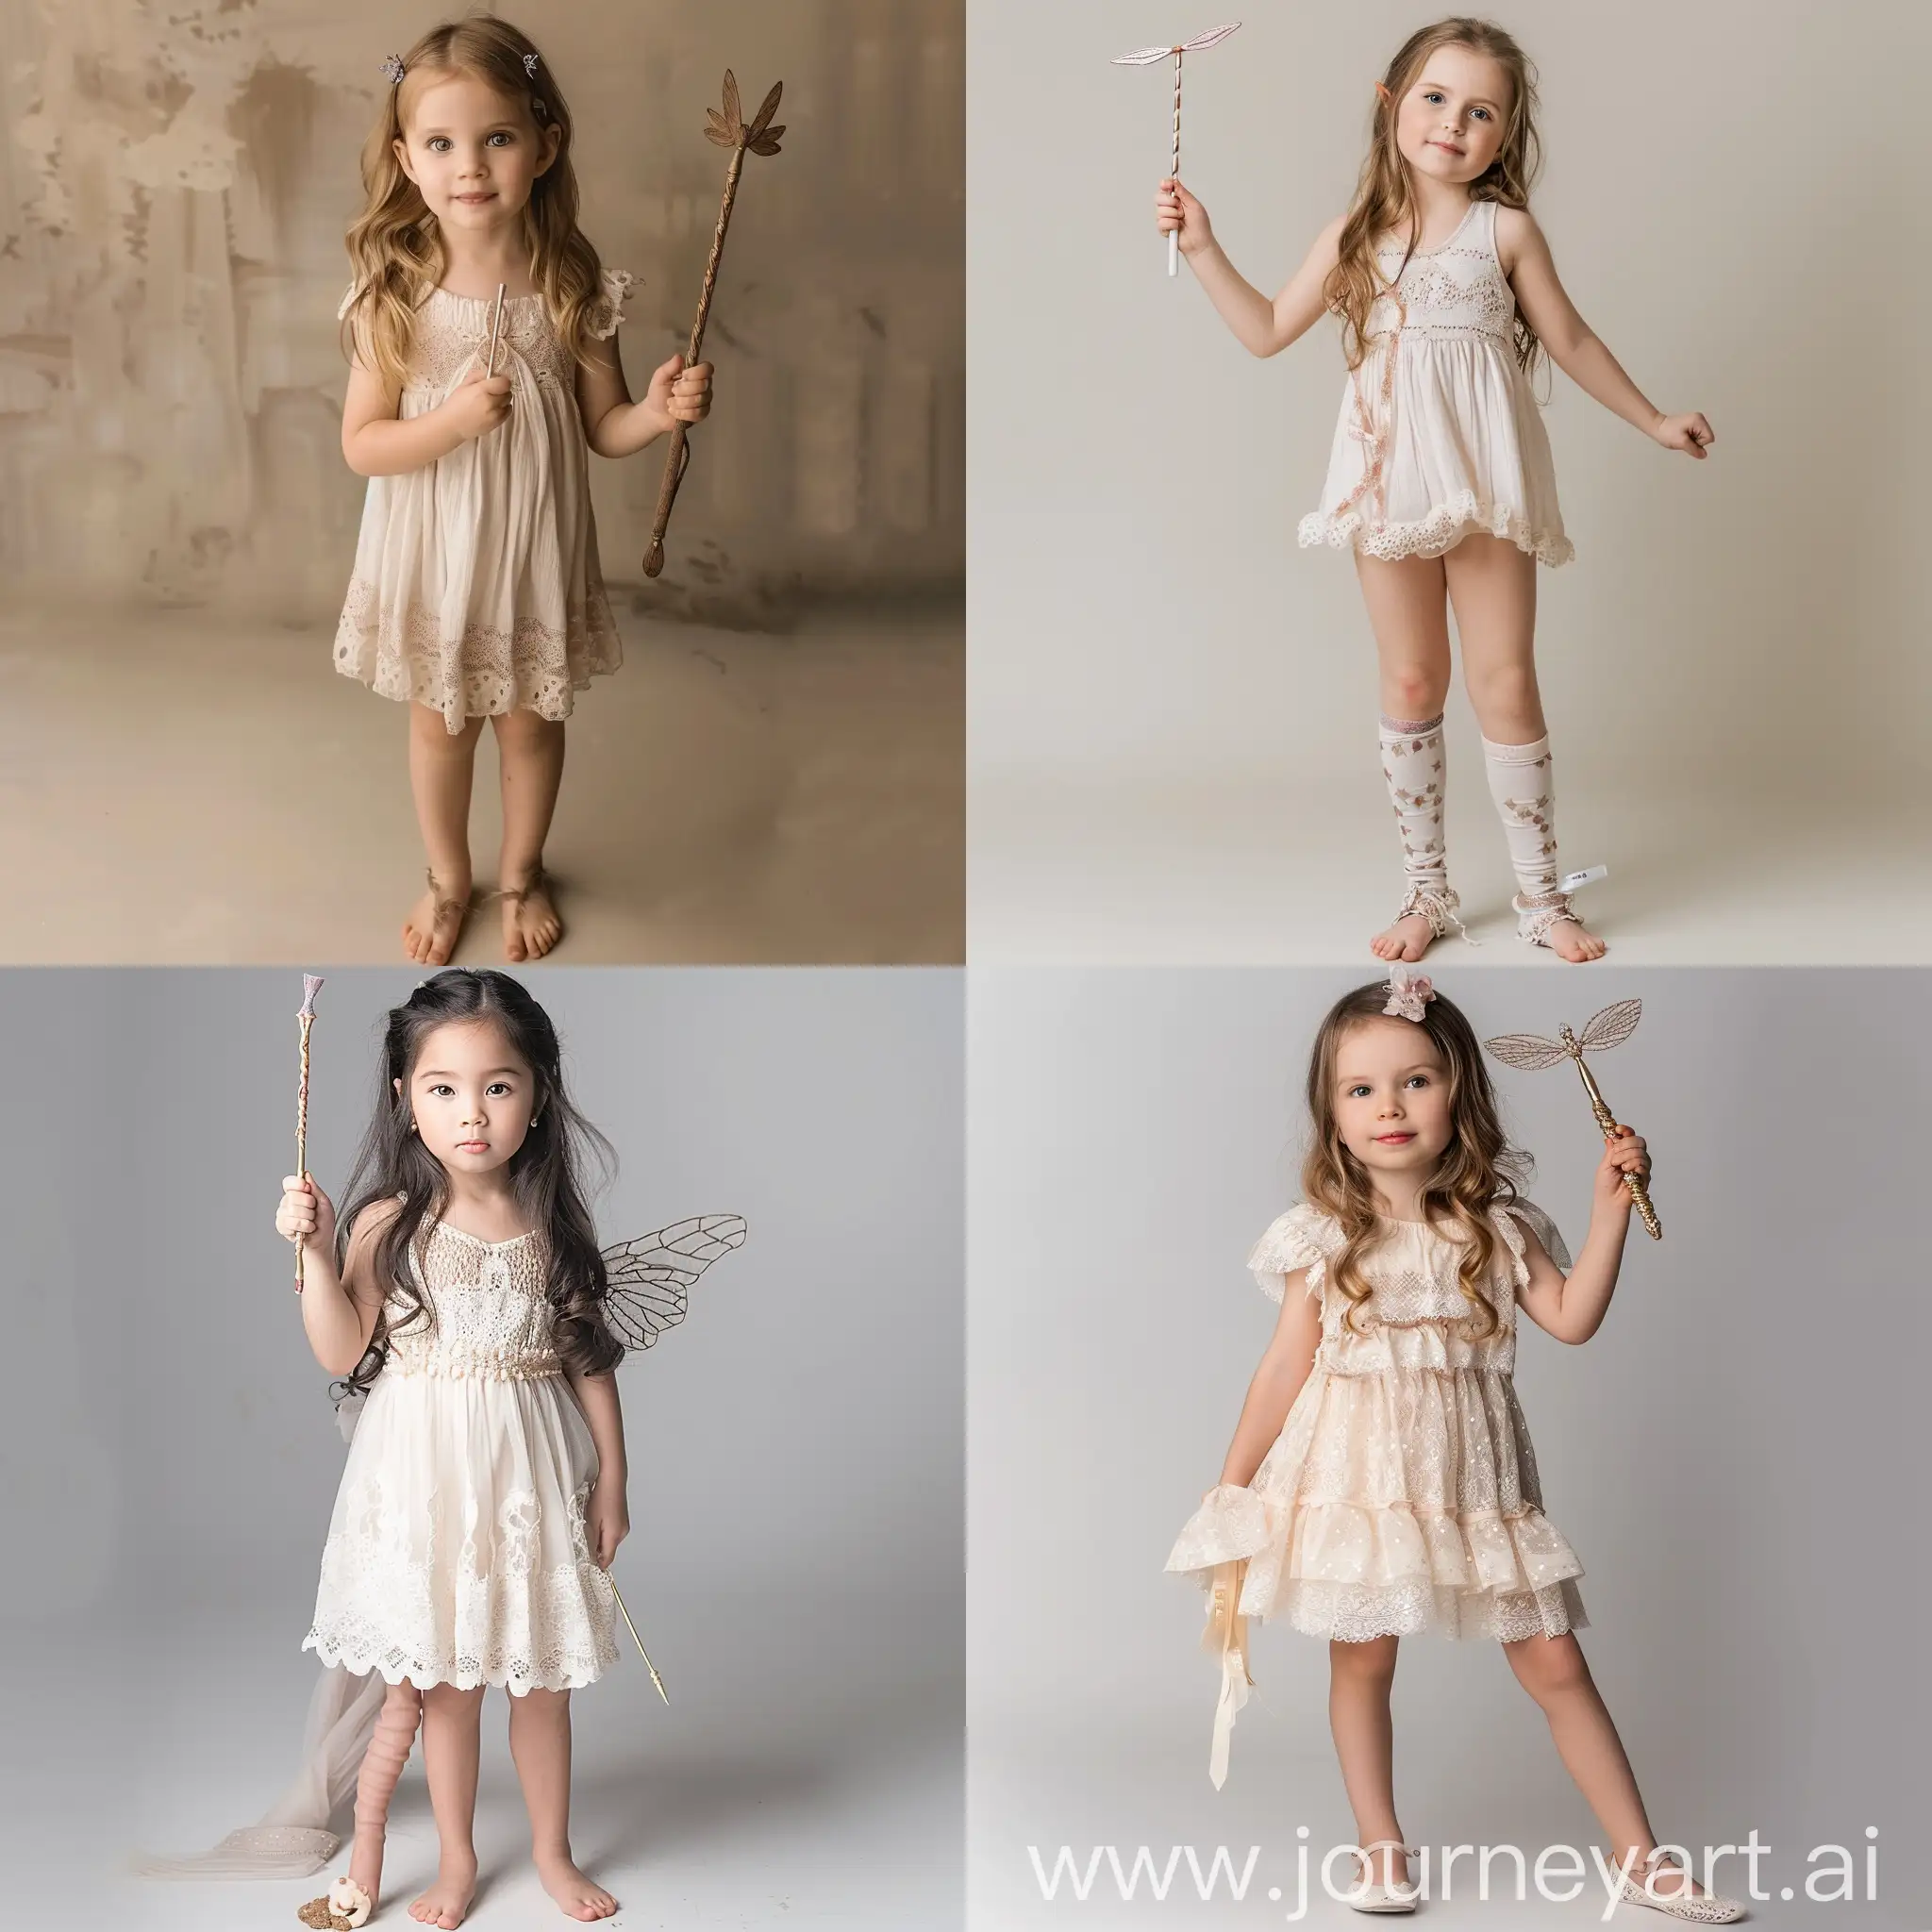 Enchanting-Princess-Pose-Little-Girl-with-Fairy-Wand-in-Hand